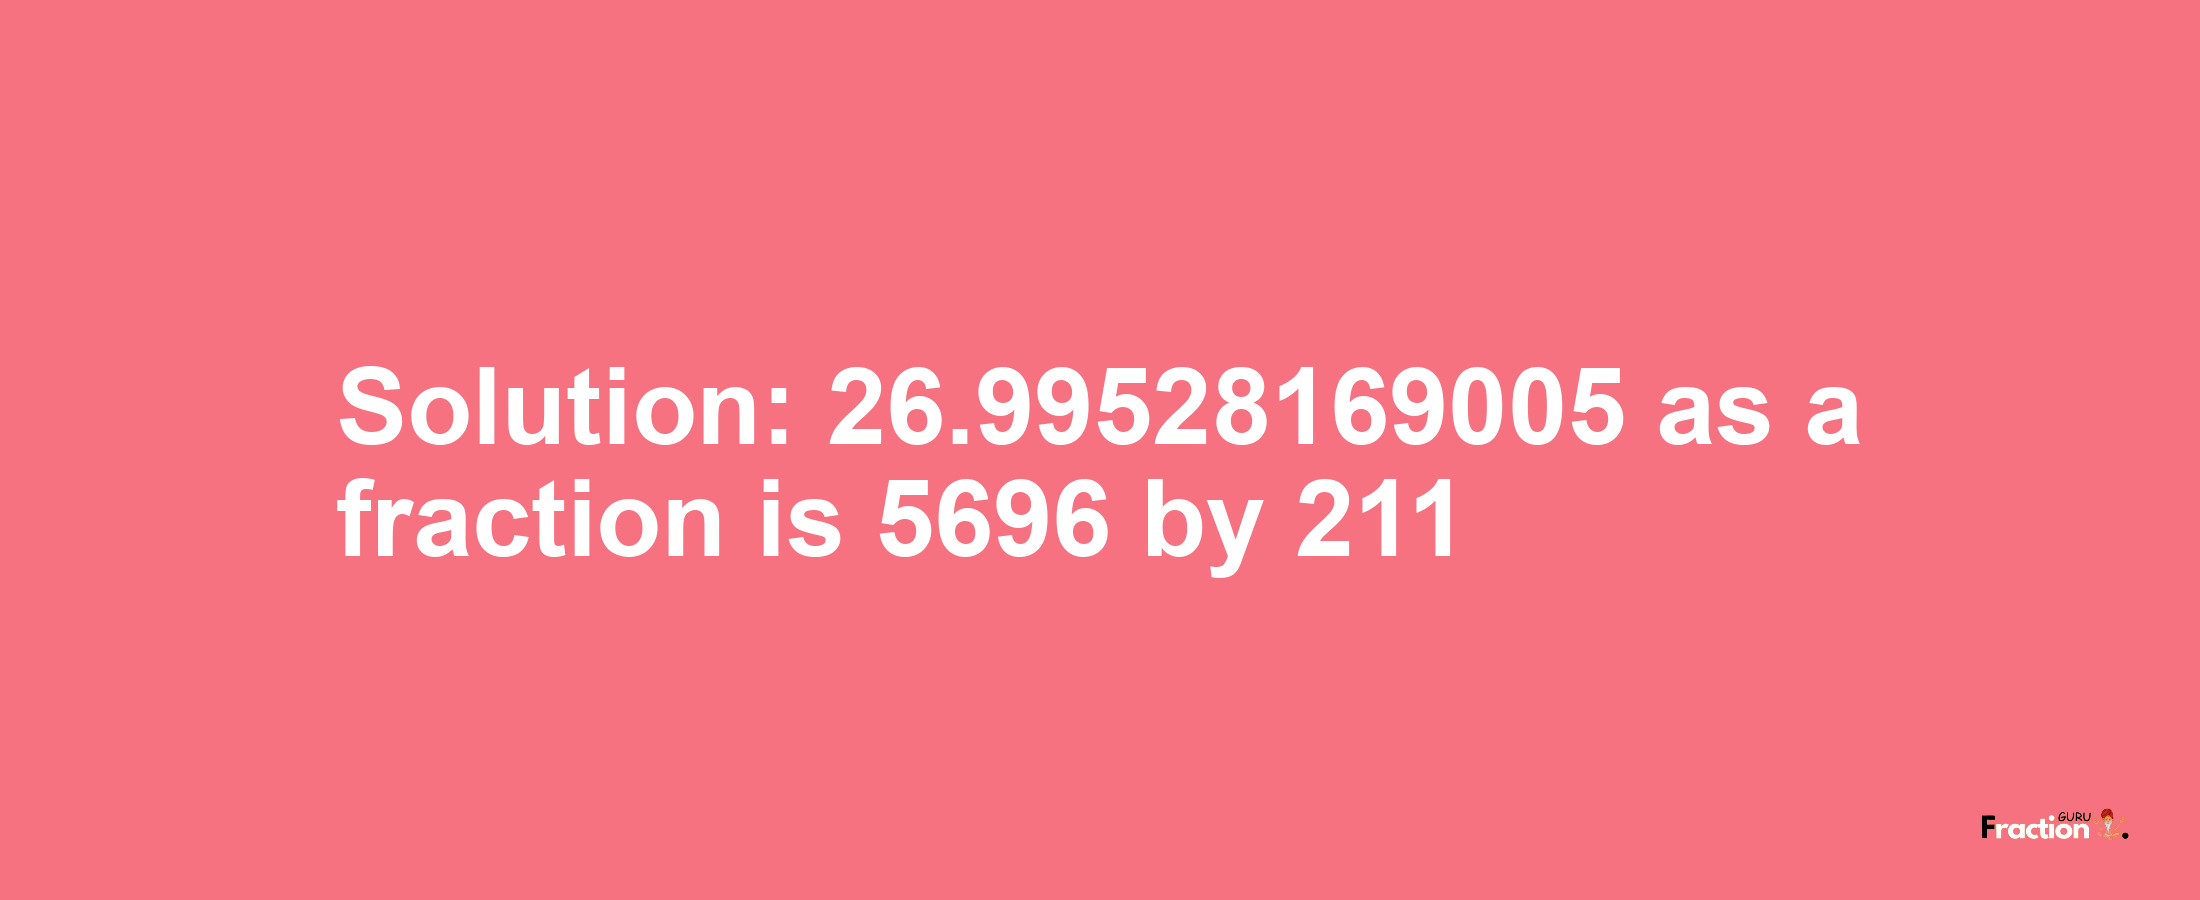 Solution:26.99528169005 as a fraction is 5696/211